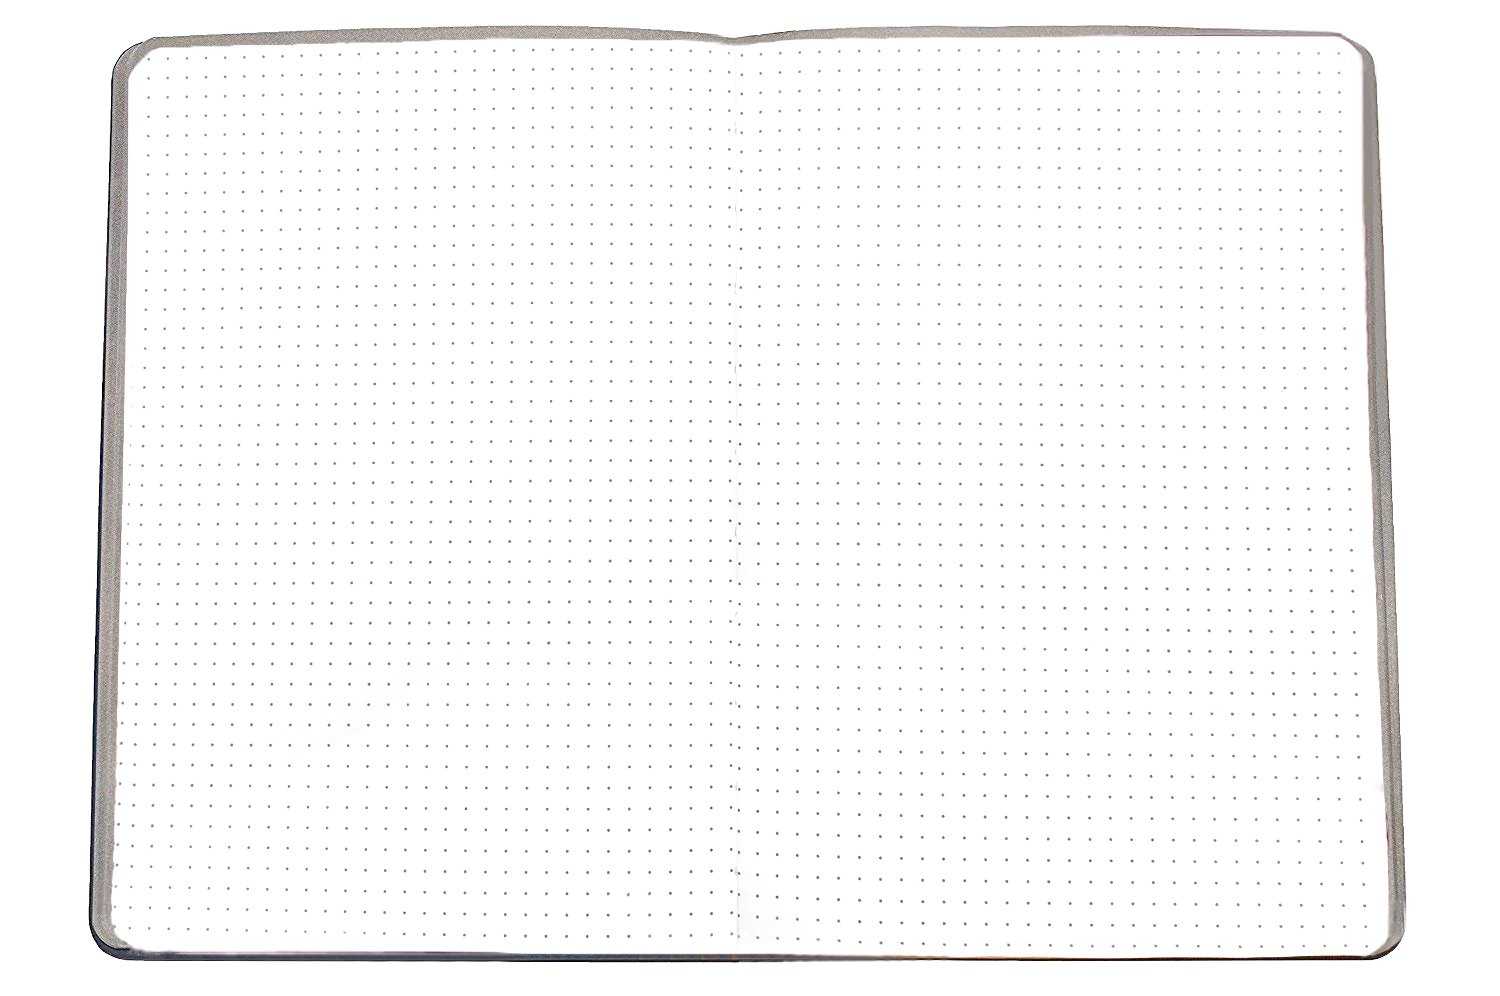 Dotted Bullet Journal Page, Blank Stock Illustration